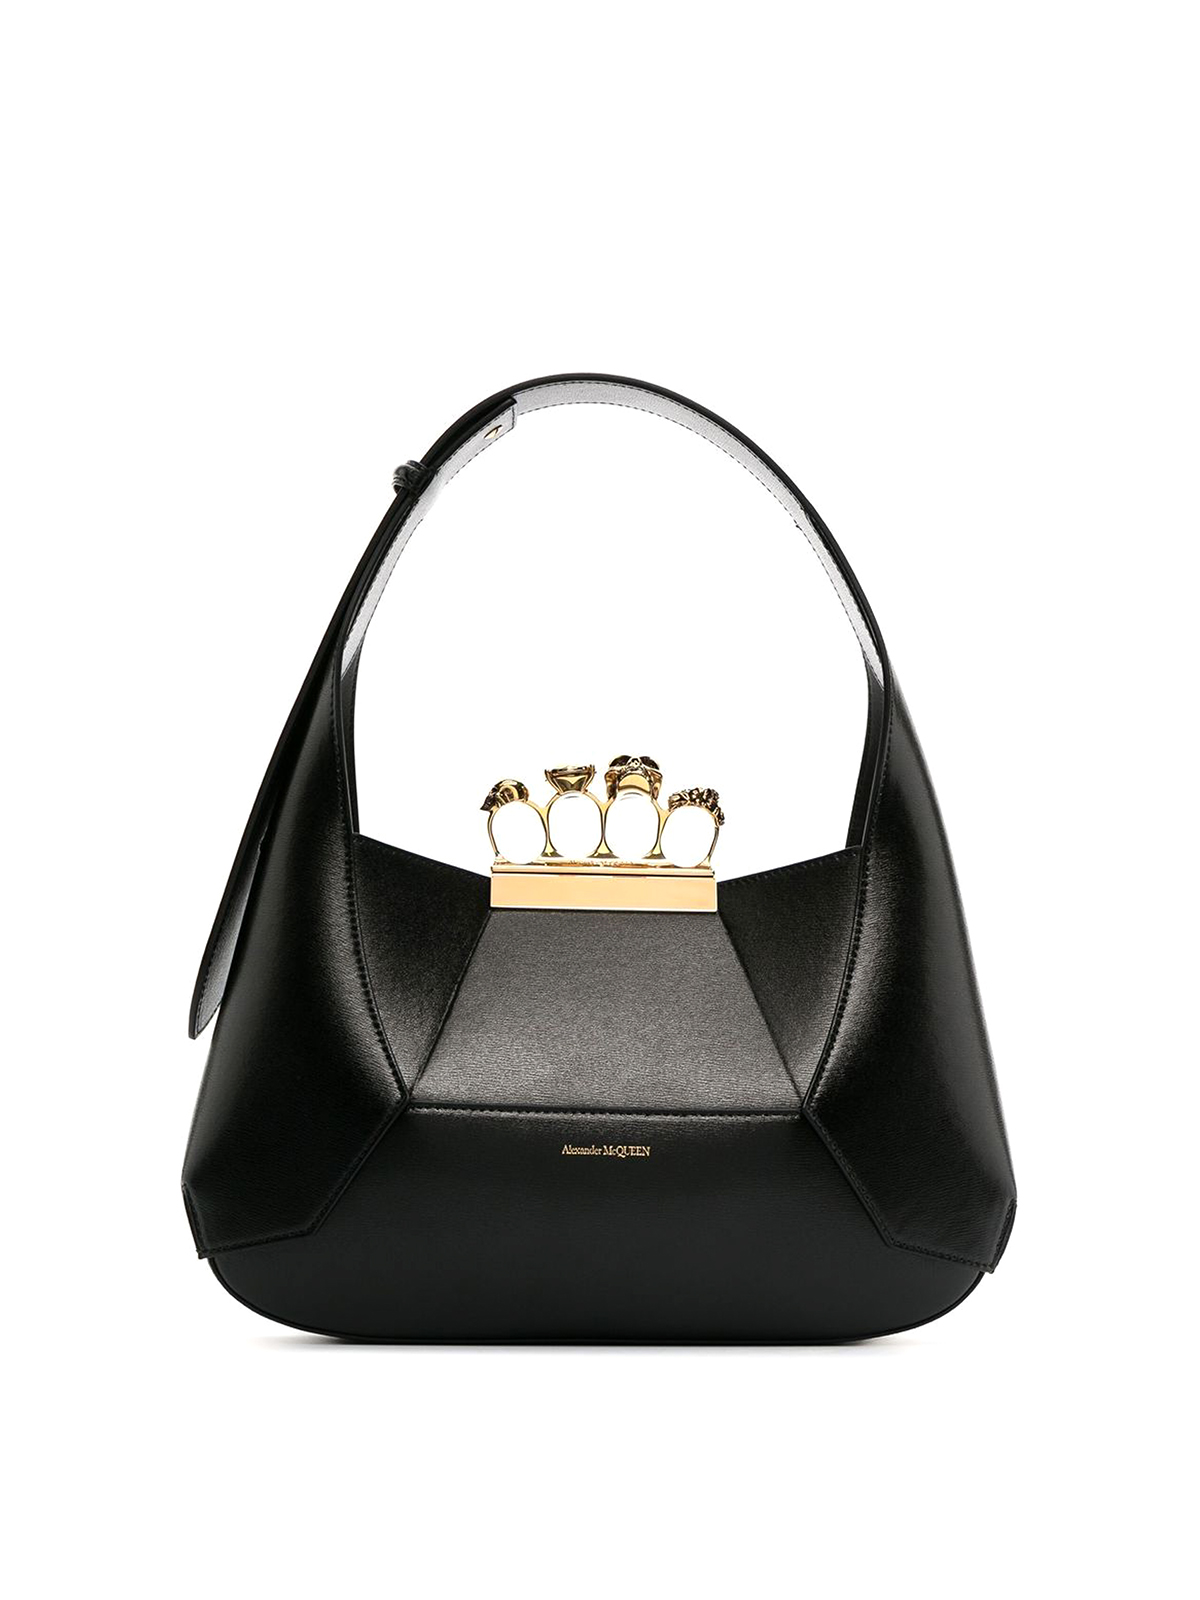 ALEXANDER MCQUEEN FOUR-RING LEATHER TOTE BAG